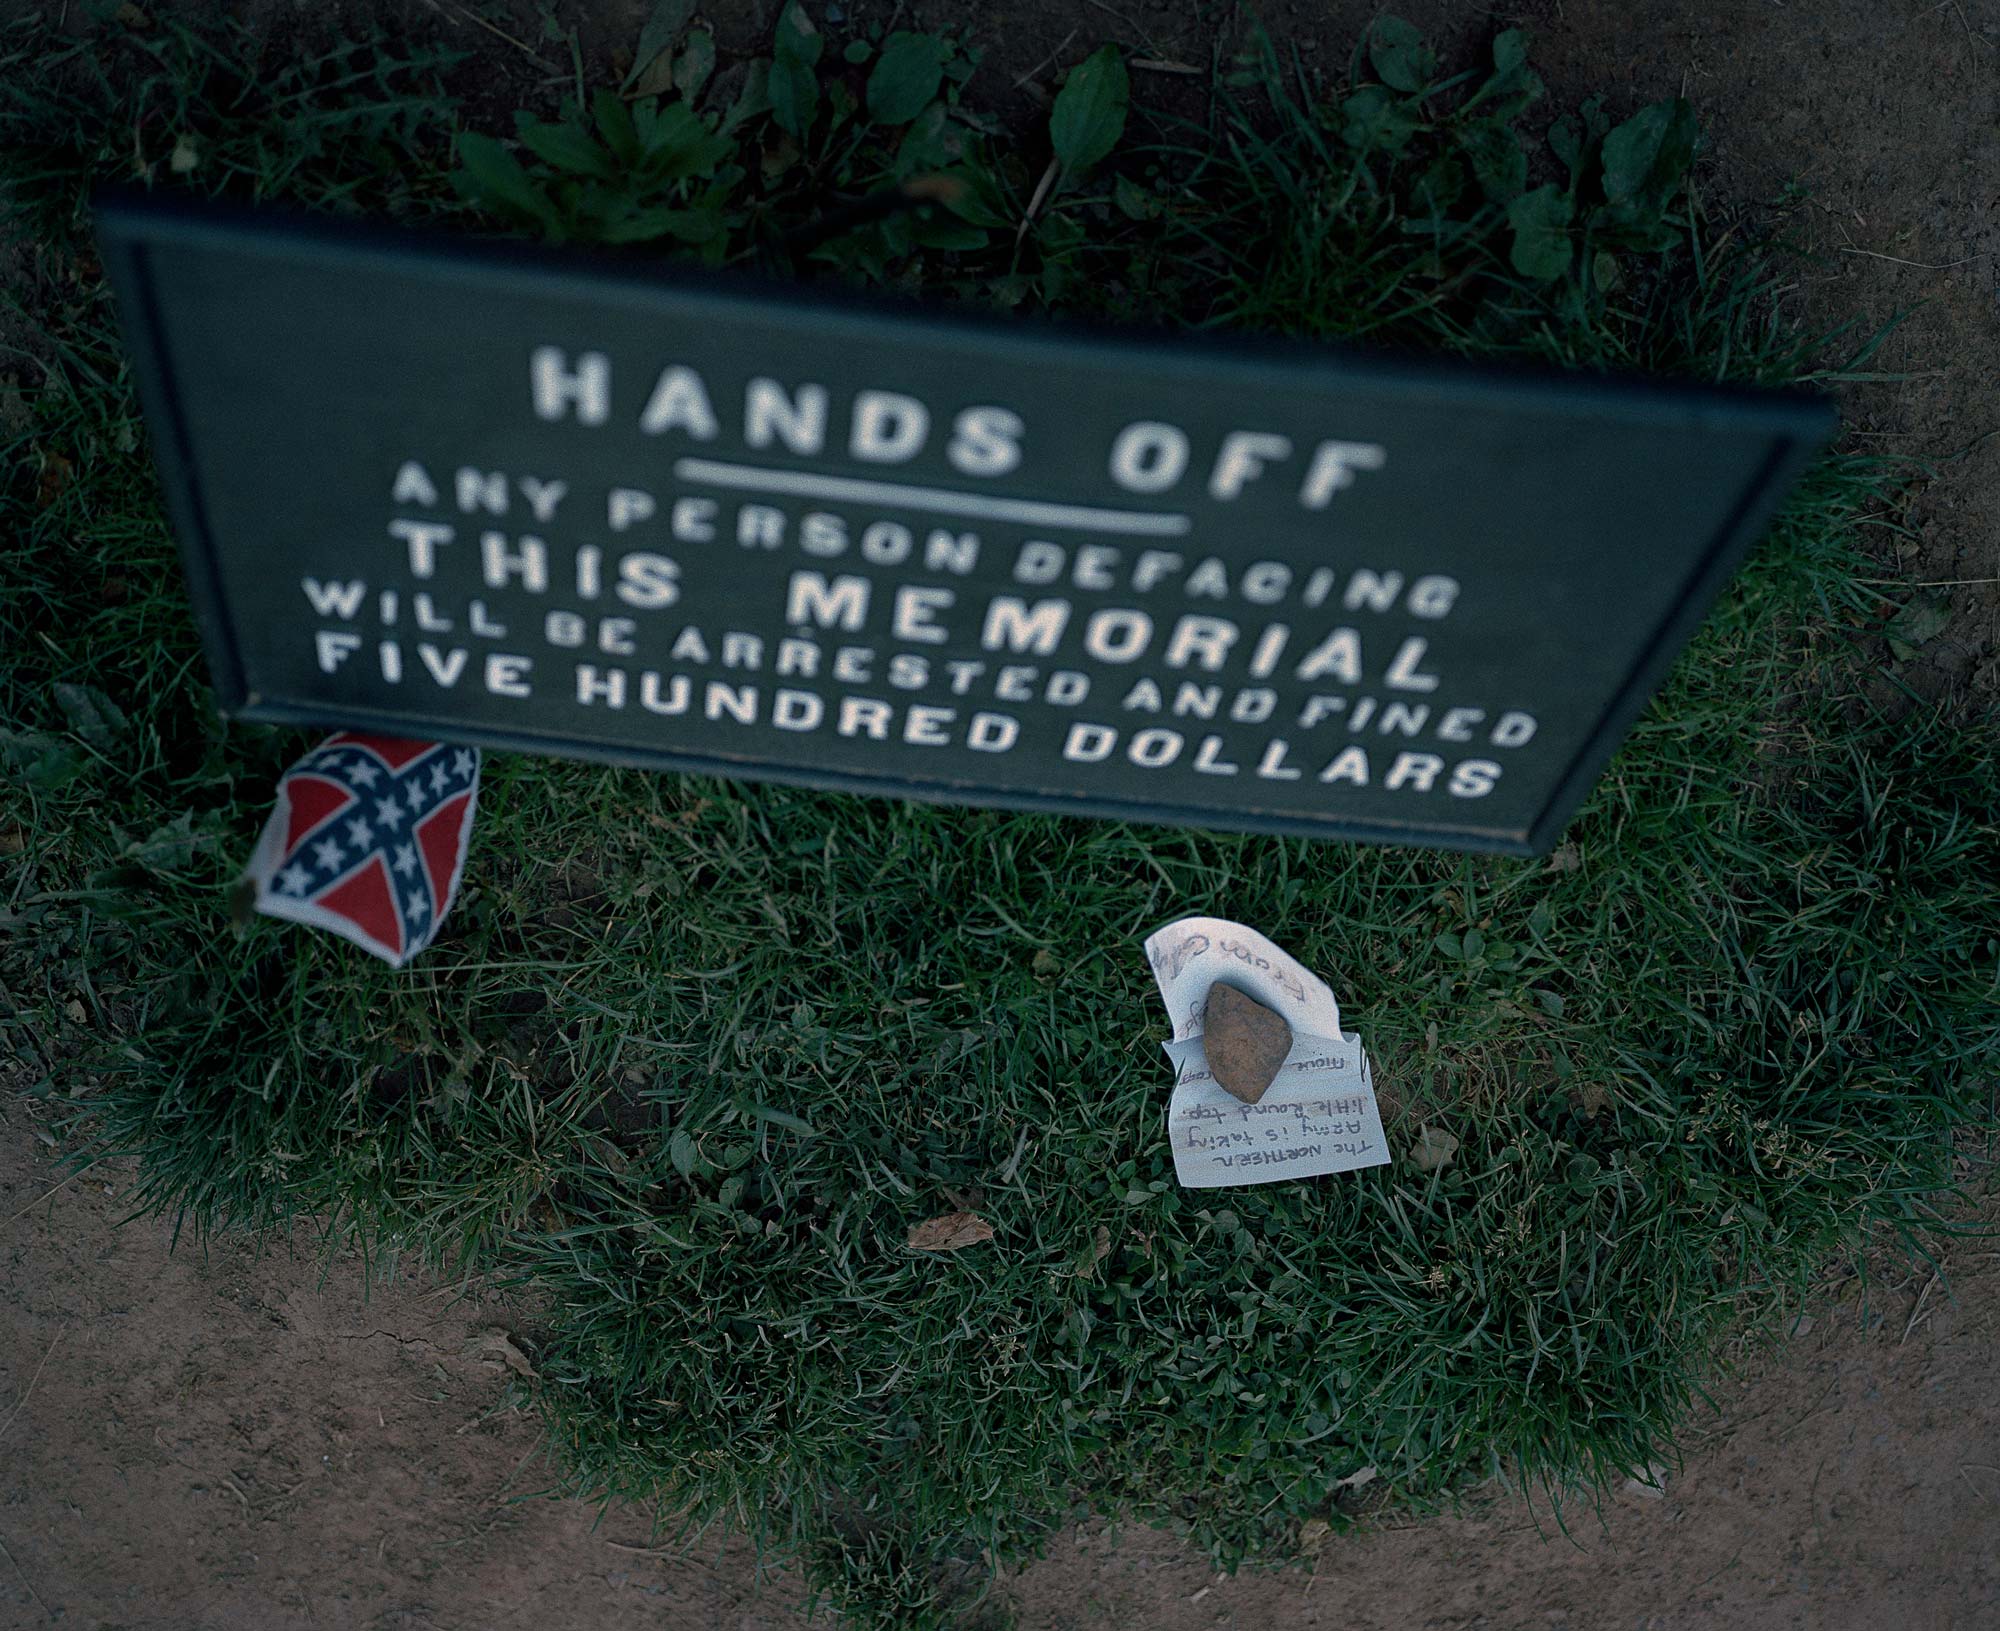 Hands Off. Any person defacing this memorial will be arrested and fined five hundred dollars. Photo by Oscar Palacio.